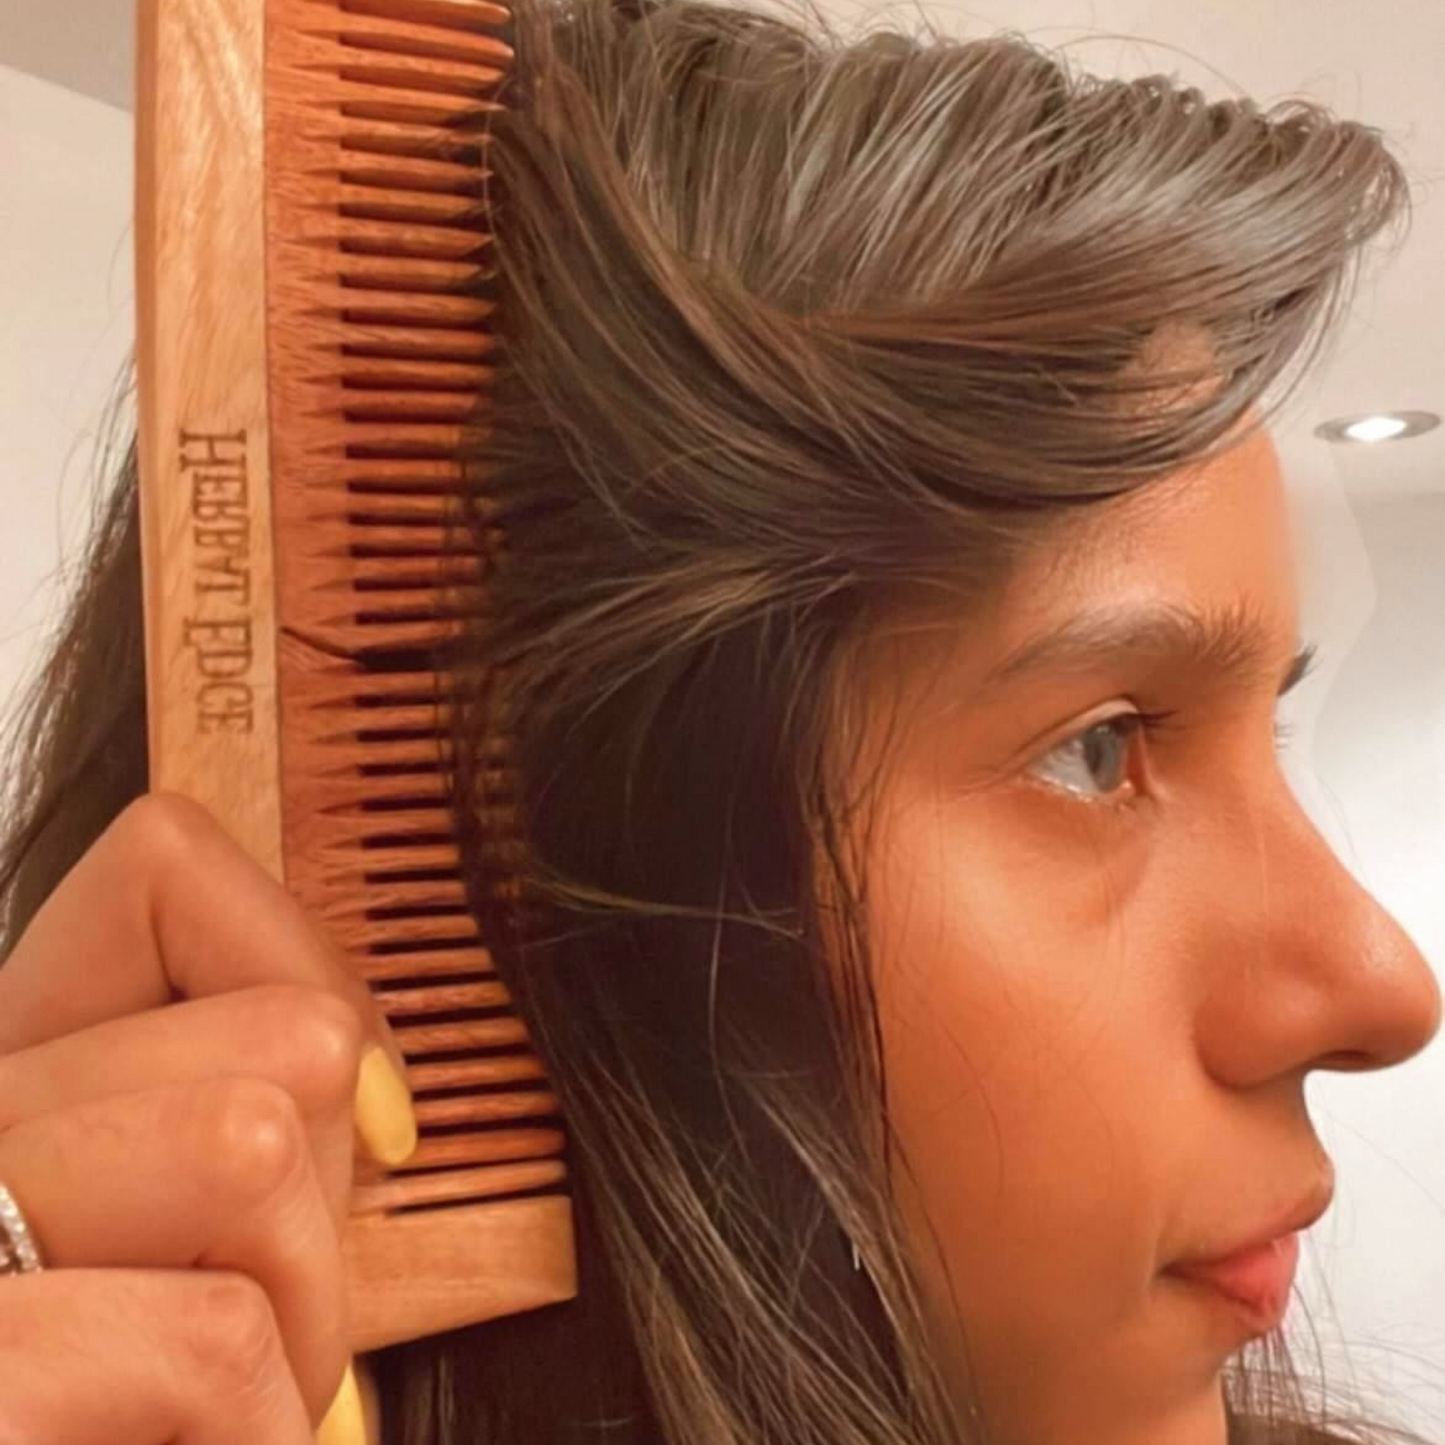 pure wood neem combs for less hair fall, dandruff & shiny hair. These handmade neem combs are made in India using ethical practices & are not coated with lacquer.